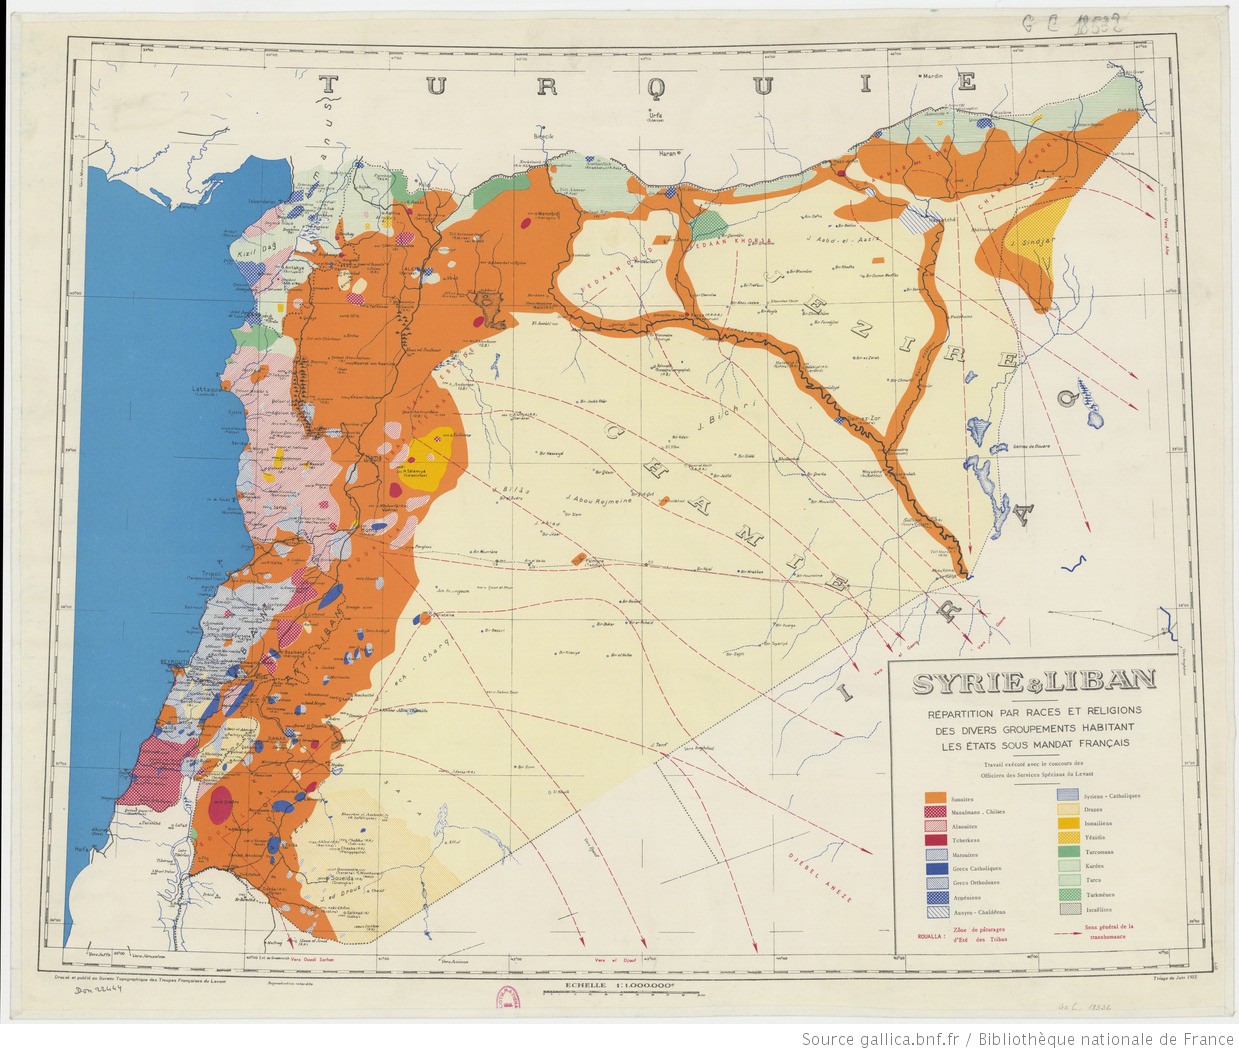 A map showing ethnic and religious distribution in Syria and Lebanon under French mandate. Source: Gallica